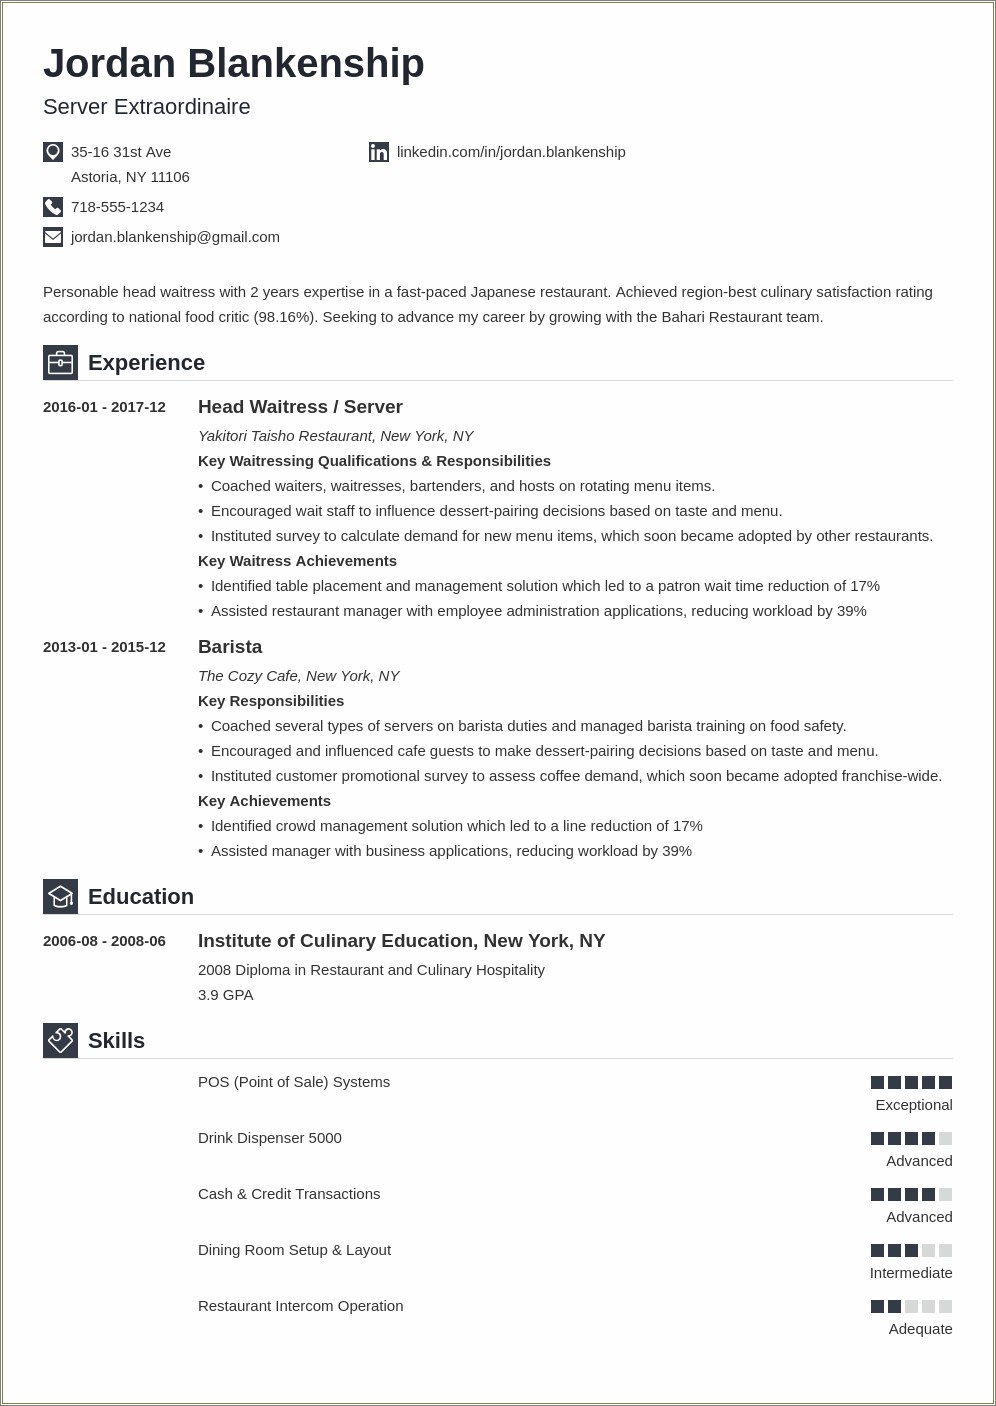 Free Resume Template For Food Service Manager